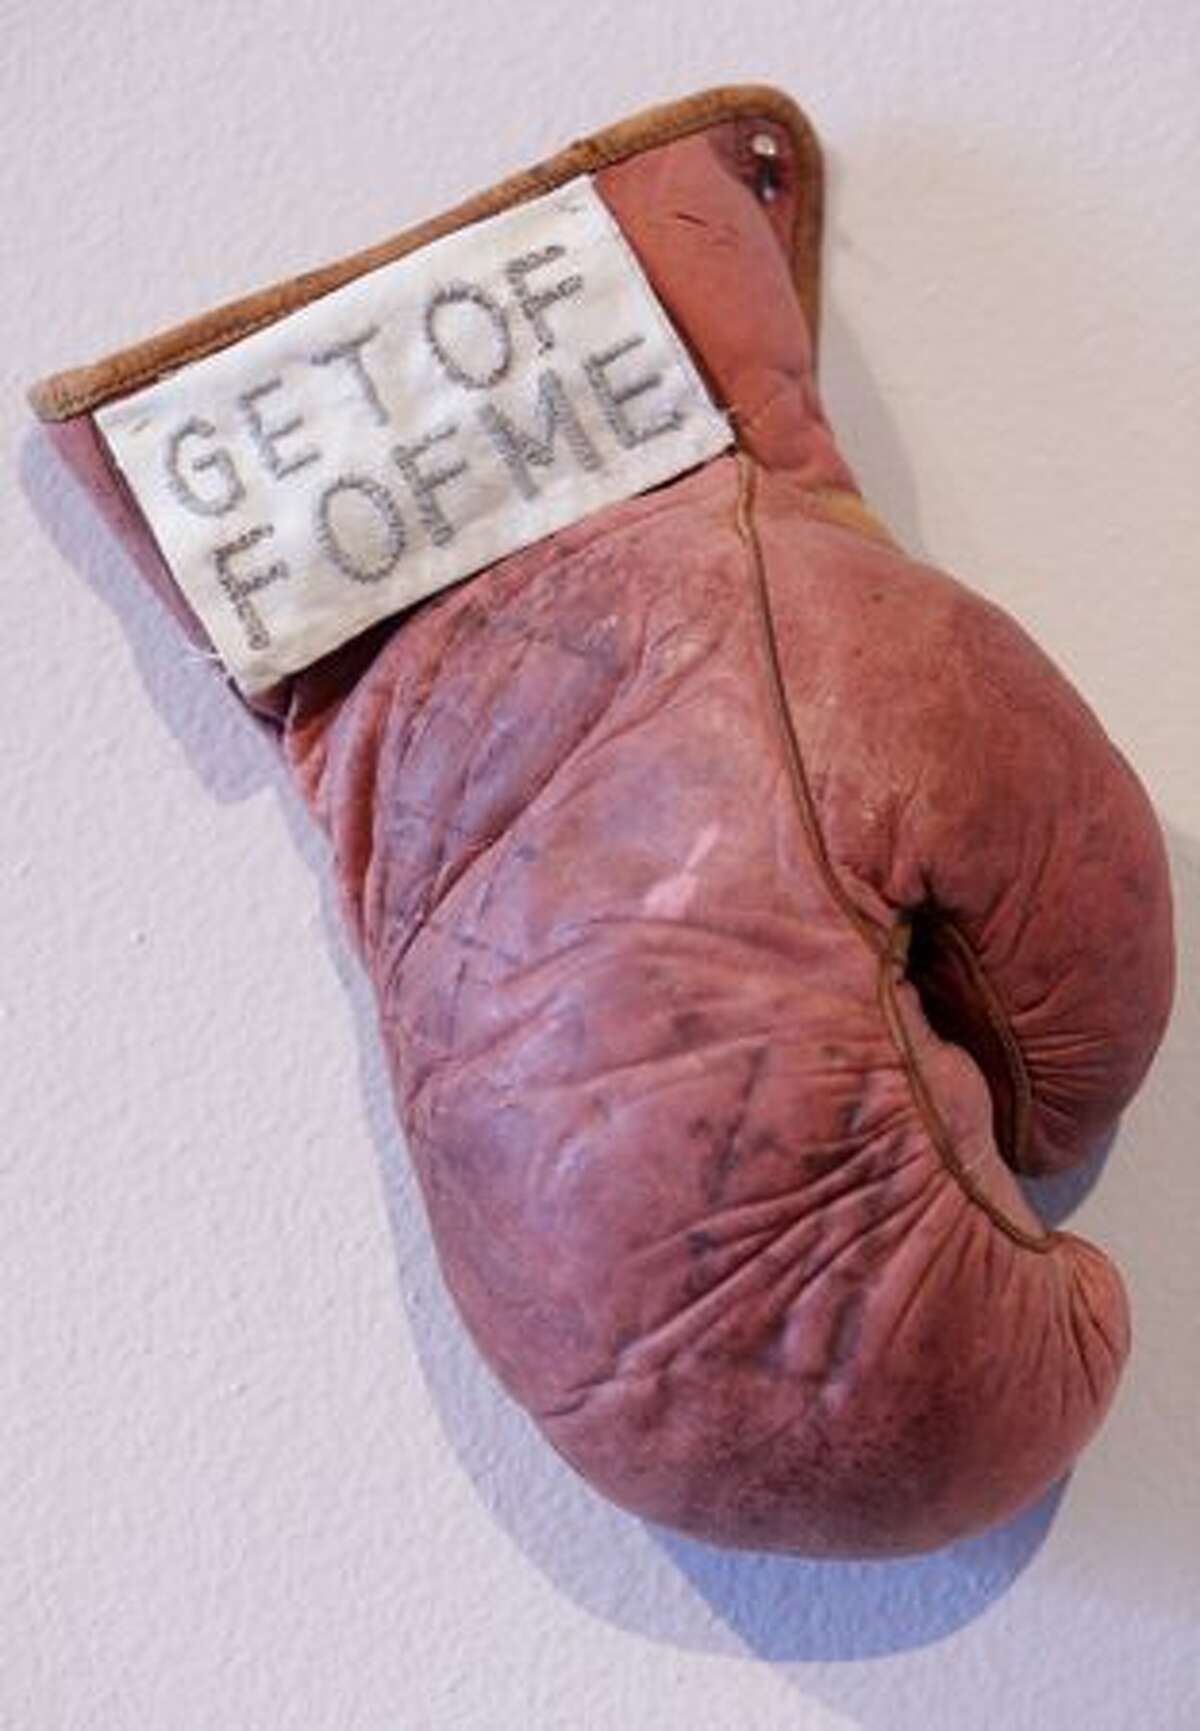 "Untitled (Get Off Me)" by Kat Larson is shown at pun(c)tuation art gallery on East Pike Street in Seattle on Tuesday May 11, 2010. Art at the show deals with the issue of Alley-Barnes and his beating by Seattle Police officers in 2005.